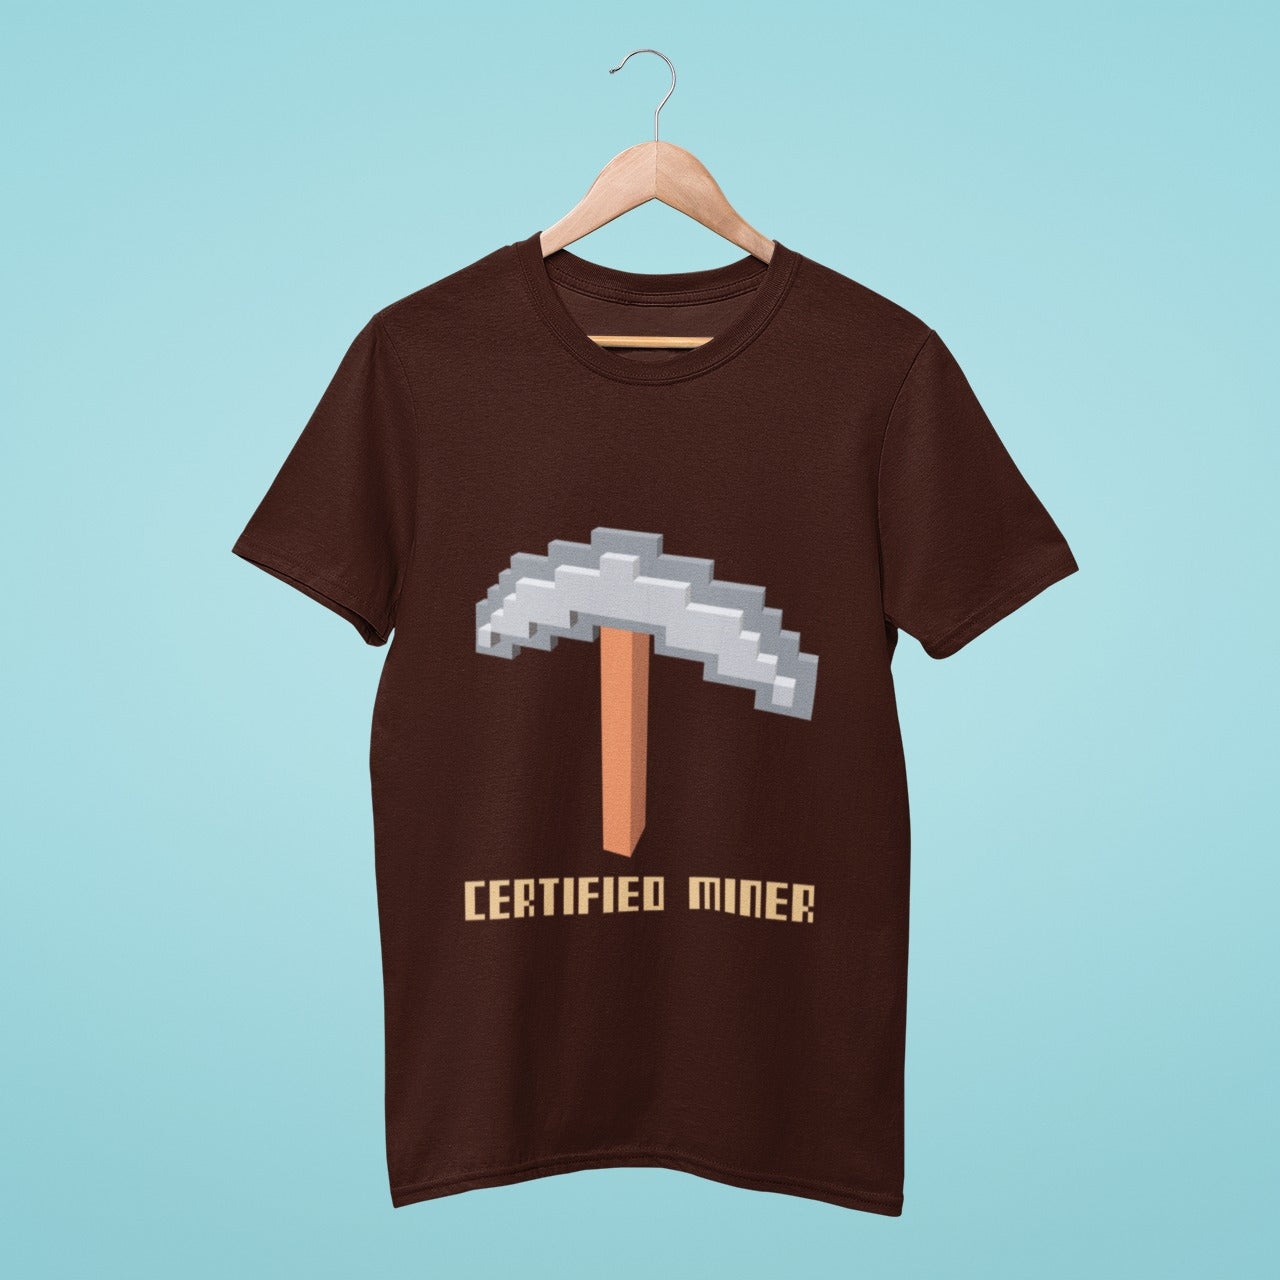 Show off your love for Minecraft with our official miner t-shirt! Featuring a Minecraft-style pickaxe graphic on a brown background, this t-shirt is perfect for any true fan. Wear it while mining and crafting in-game or just lounging around at home.